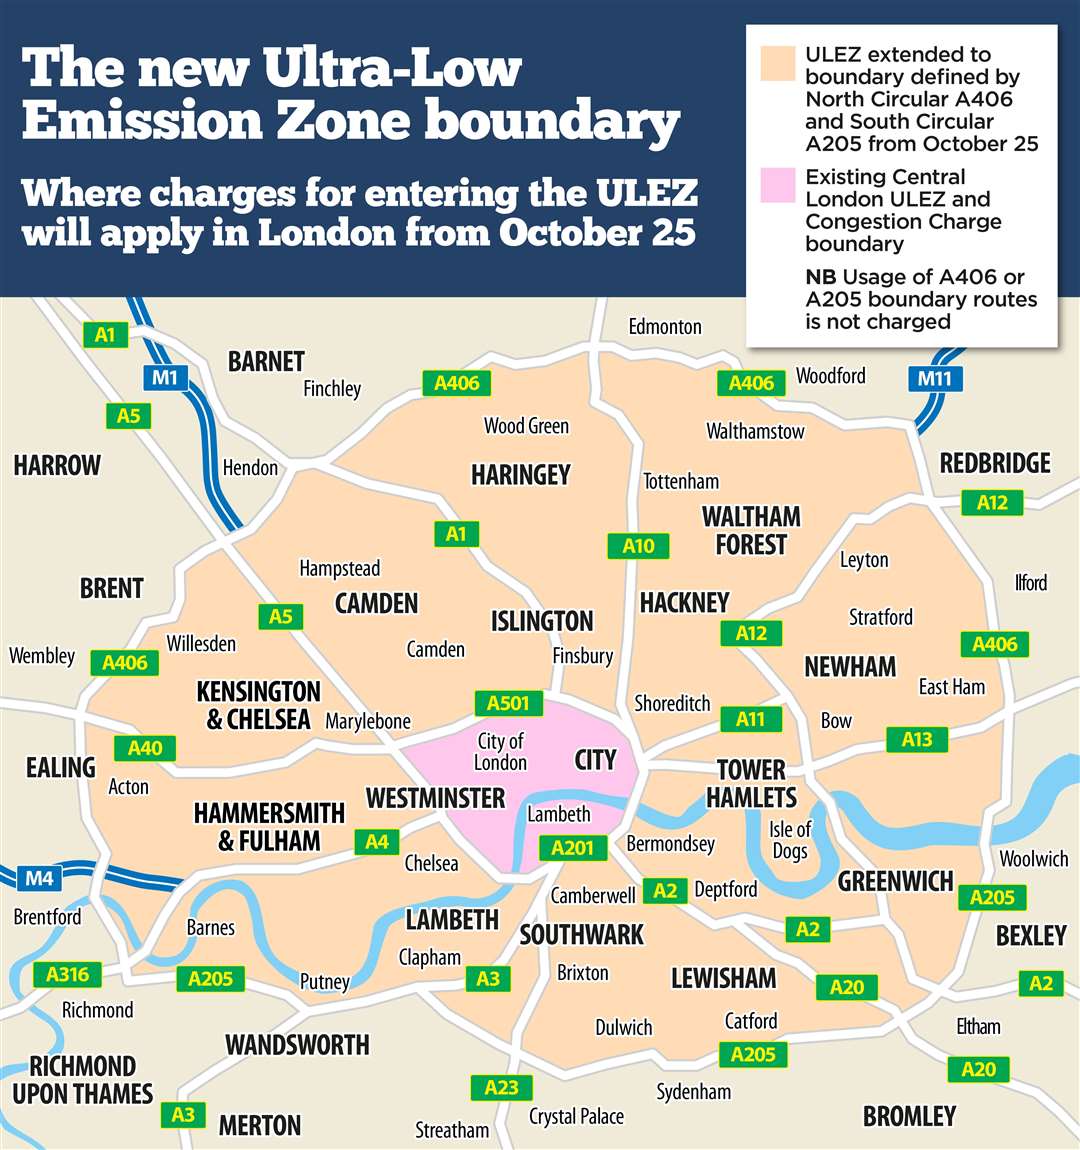 A map showing how ULEZ expanded on October 25